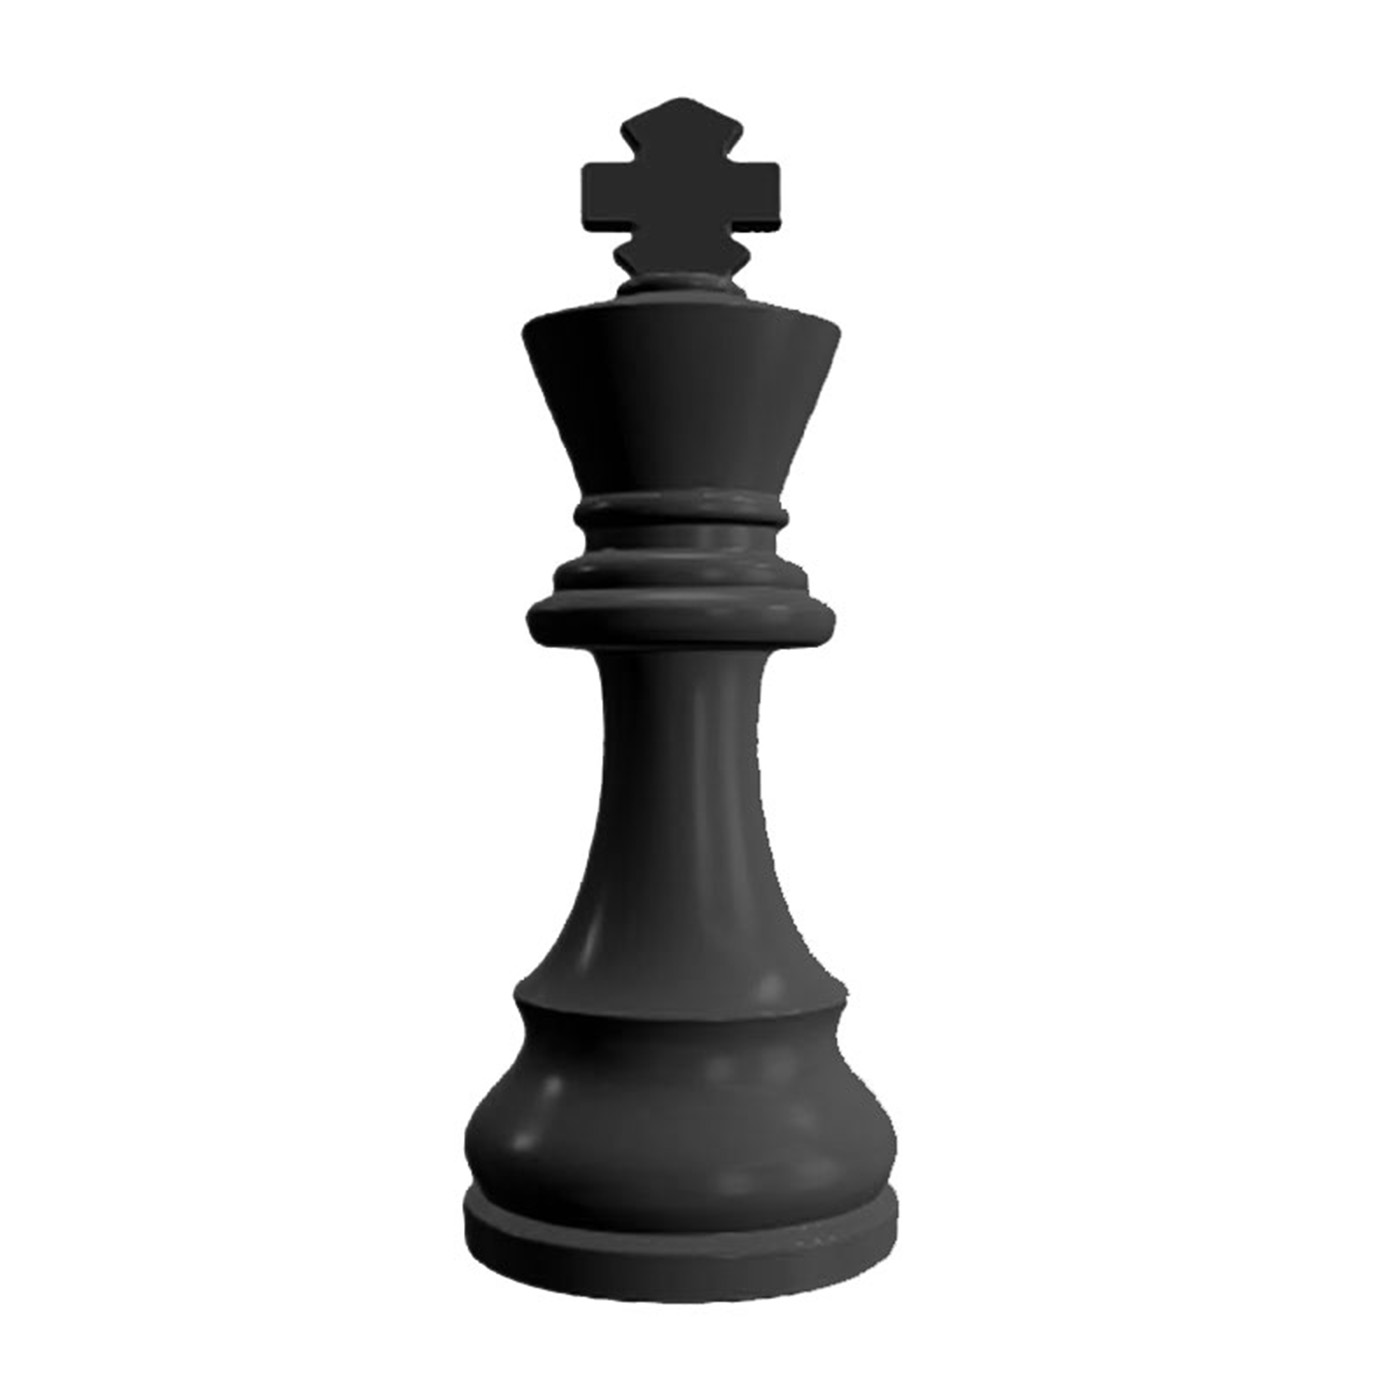 Resin Chess King Statue -Black 10x10x25cm for Sale at Mobelli